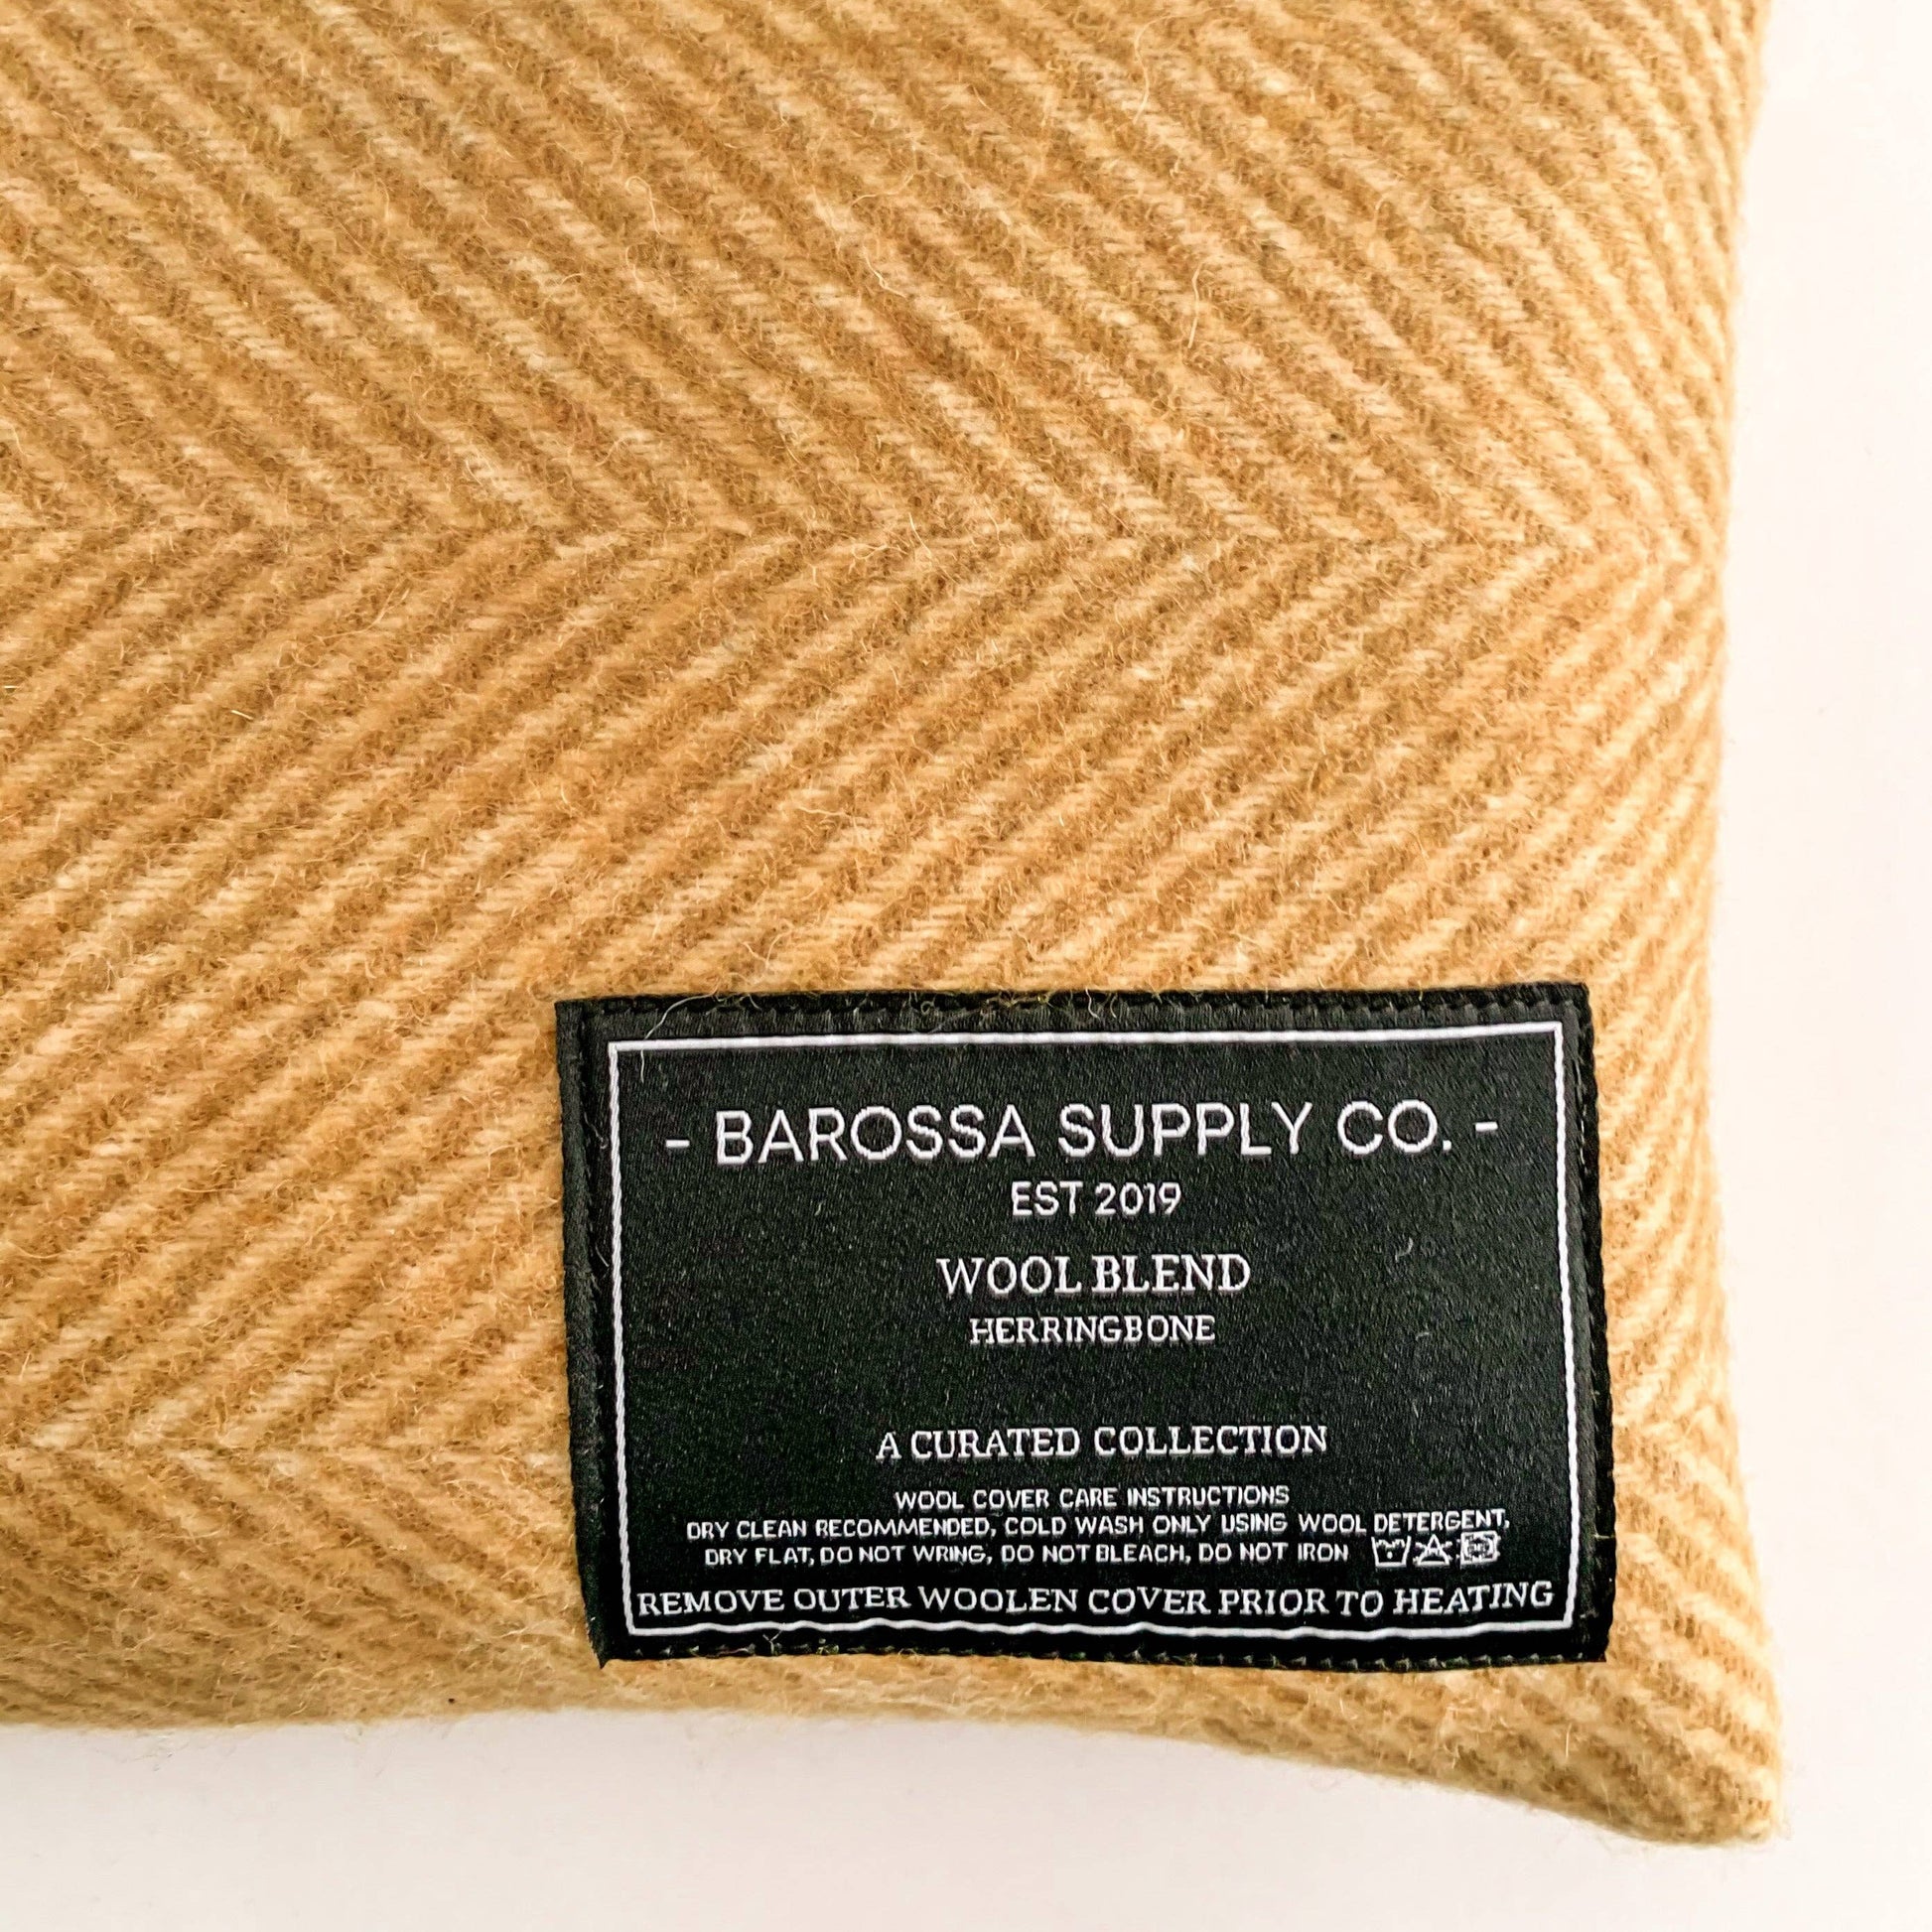 In collaboration with Cotton Apothecary, Barossa Supply Co is pleased to offer our range of herringbone wool blend heat packs. Perfect for providing comfort and warmth, these heat packs are both functional and aesthetically pleasing. They can be used both warm and cold and may provide relief from aches and pains. The timeless appeal of these herringbone heat packs will compliment many decor styles and they are a beautiful addition to your home when they are on display for everyday use.